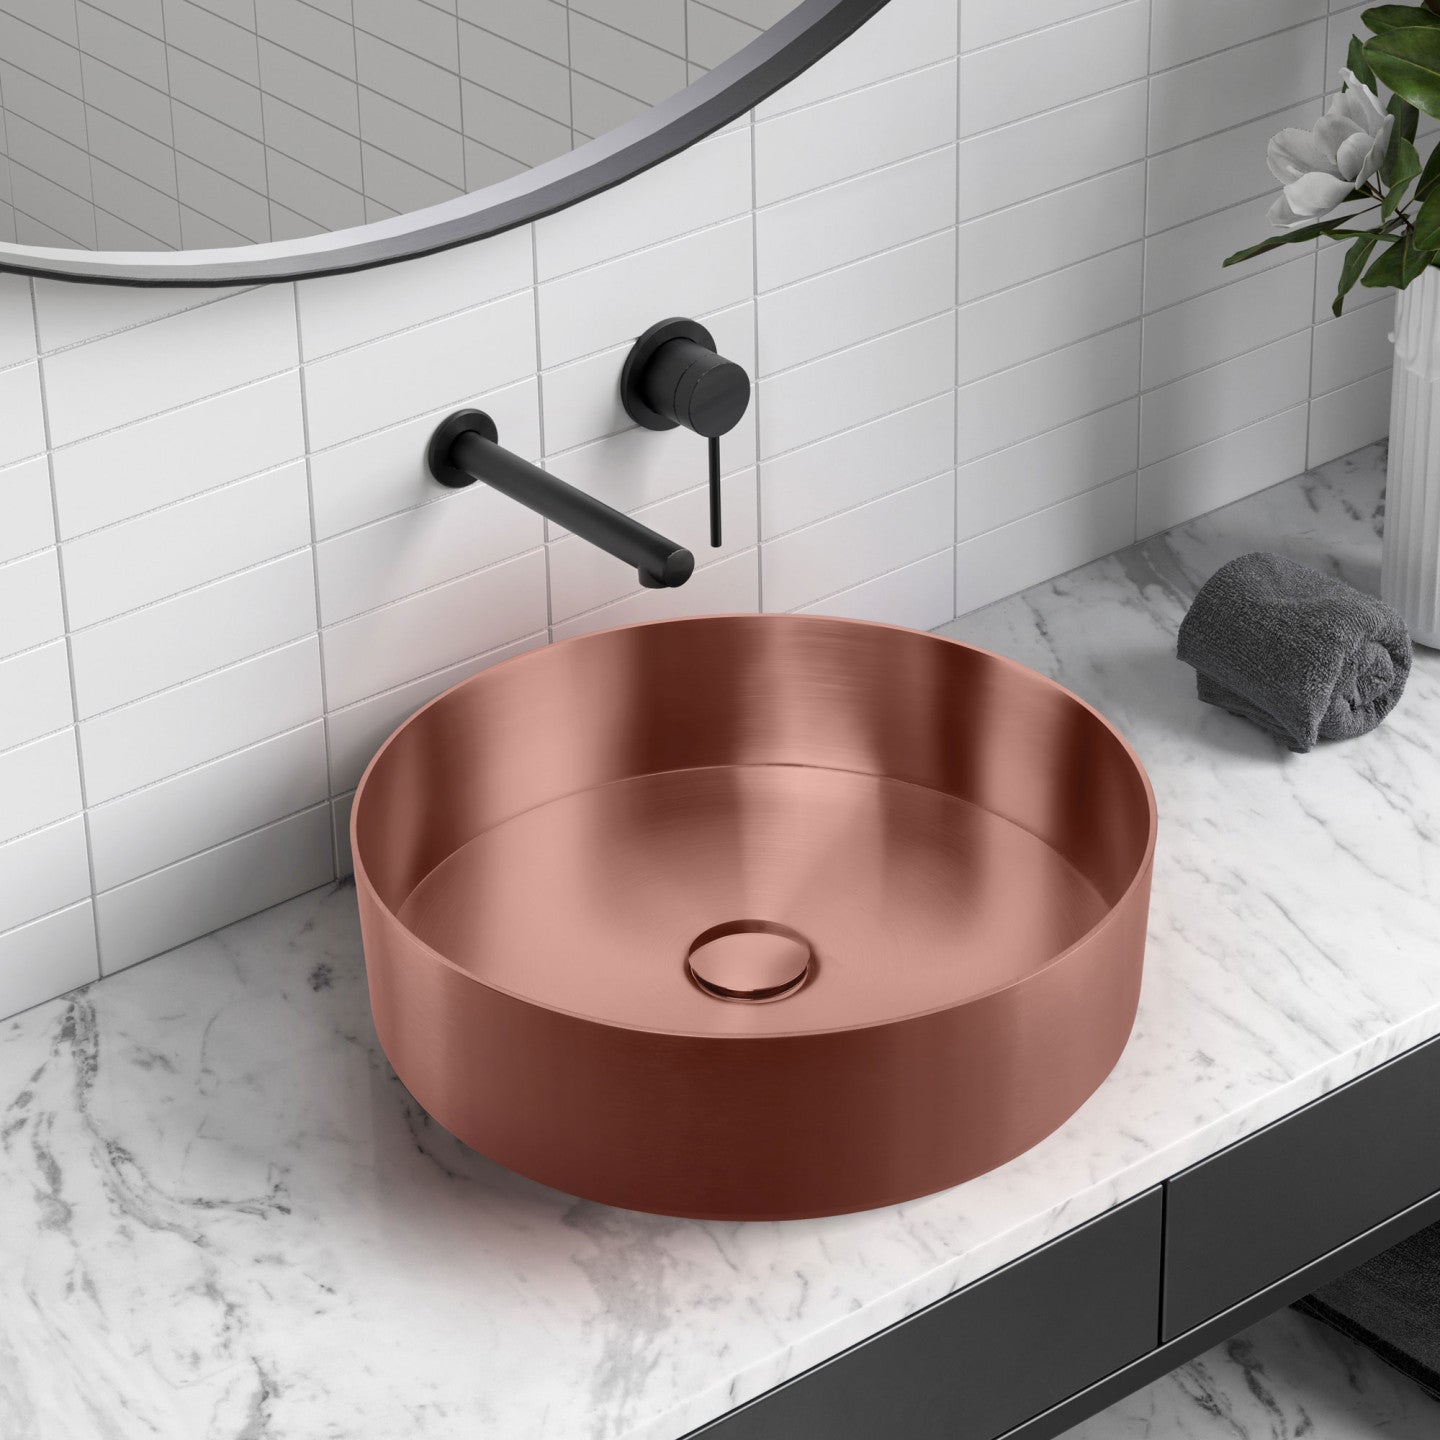 OLIVERI MILAN ROUND STAINLESS STEEL COUNTER TOP BASIN COPPER 400MM